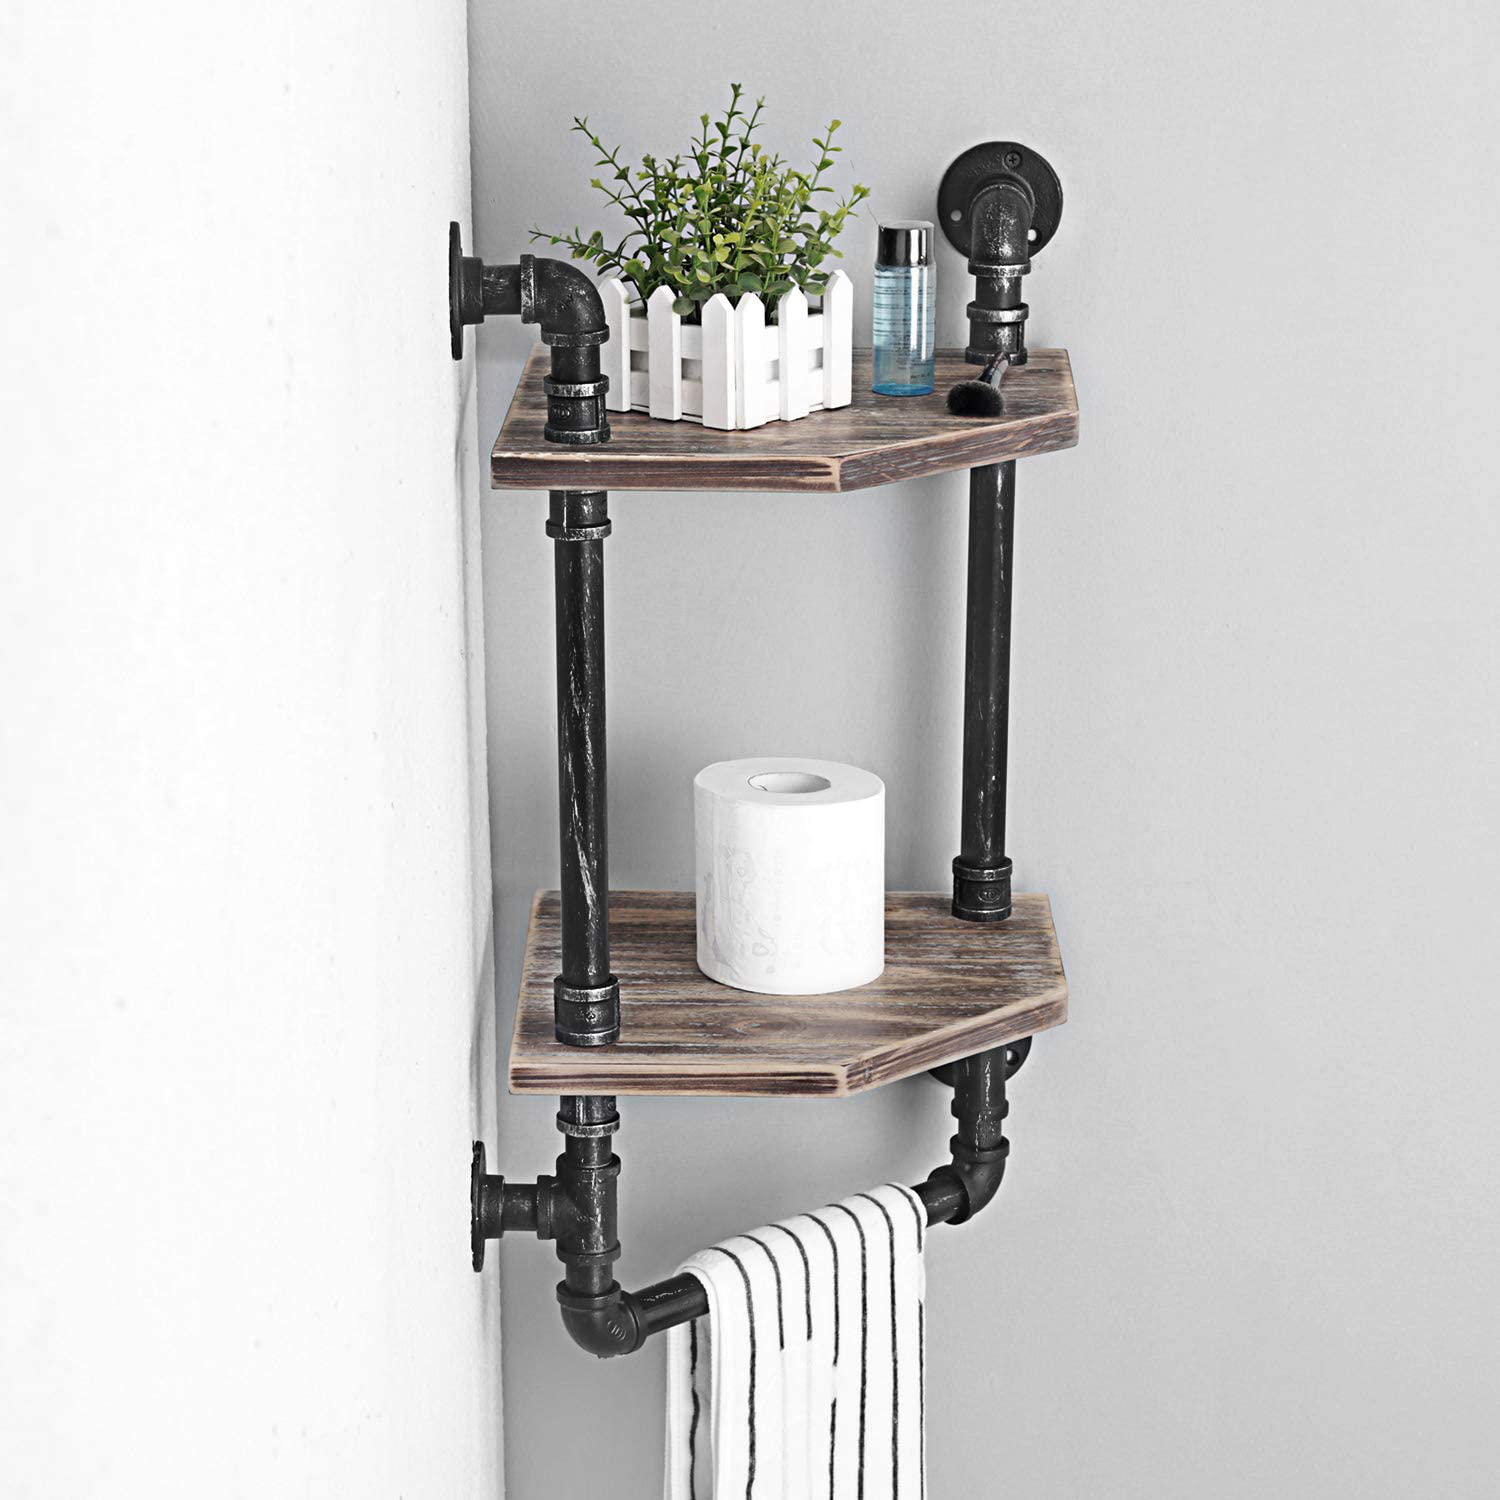 https://www.ekrhome.com/industrial-pipe-shelfrustic-corner-shelves-with-towel-barbathroom-shelves-wall-mounted2-tiered-metalreal-wood-home-decor-floating-shelves-product/